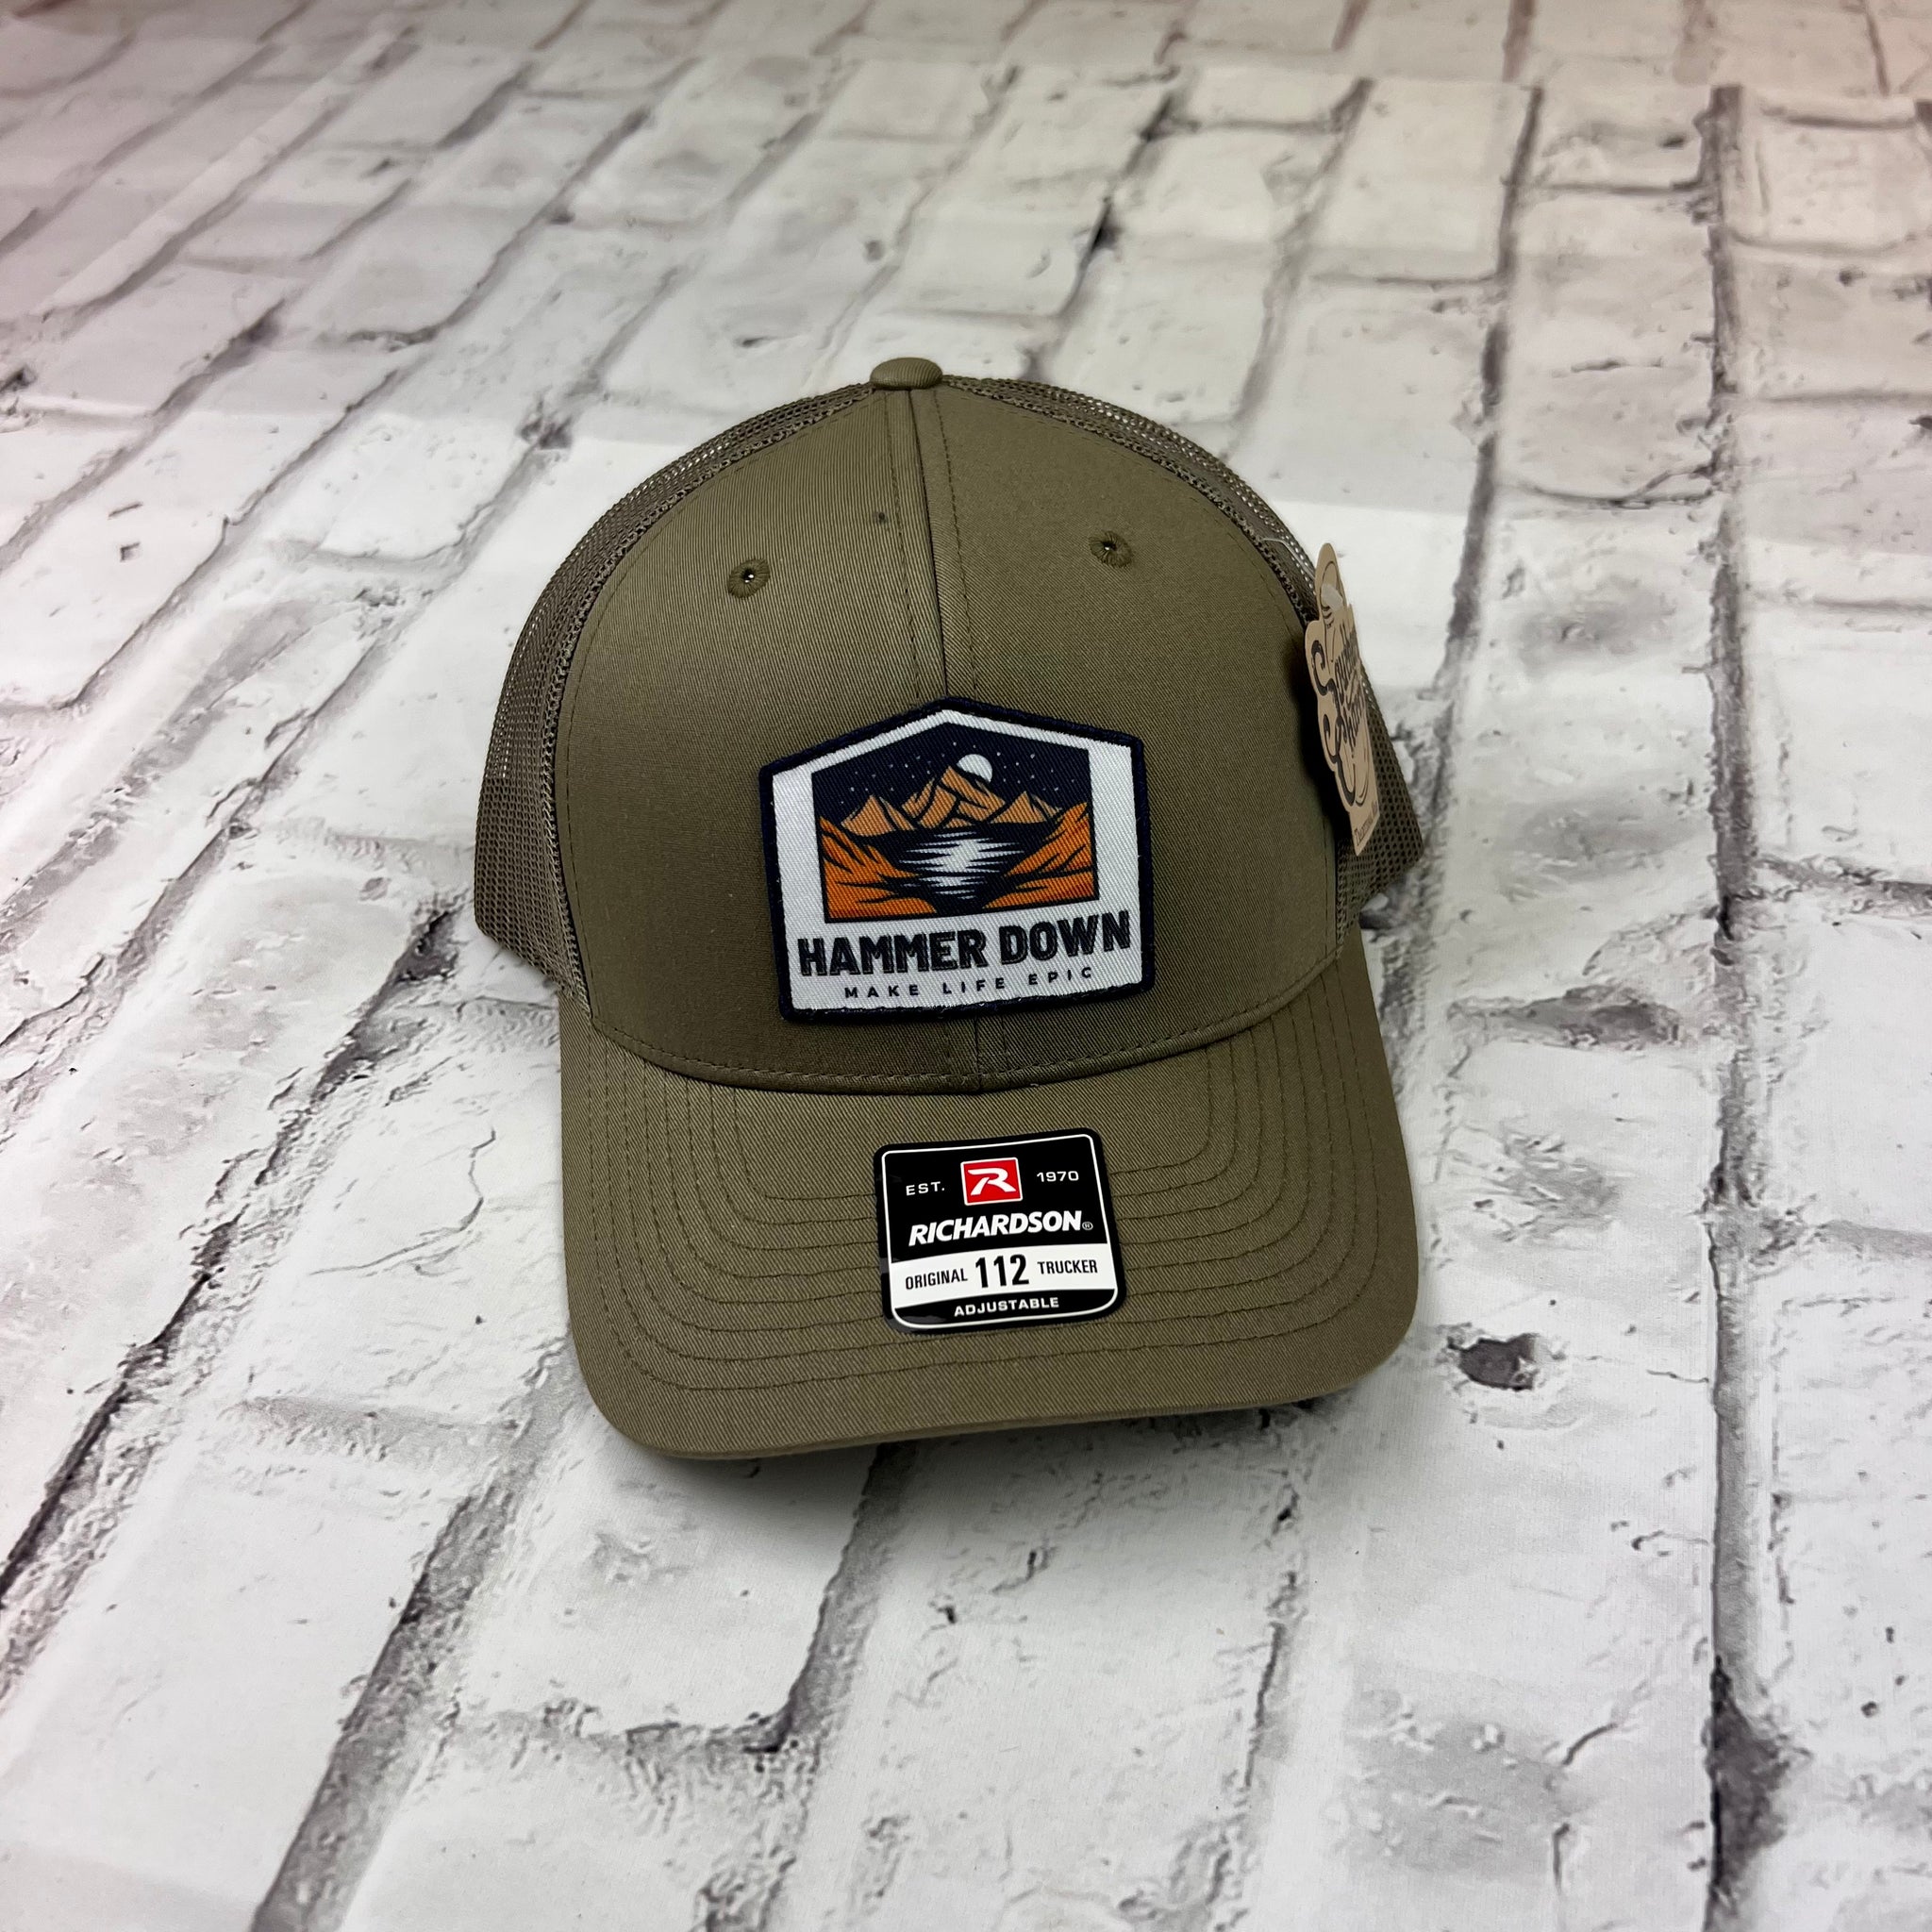 Hammer Down "Mars Mountain" Hat - Loden with Leather Patch